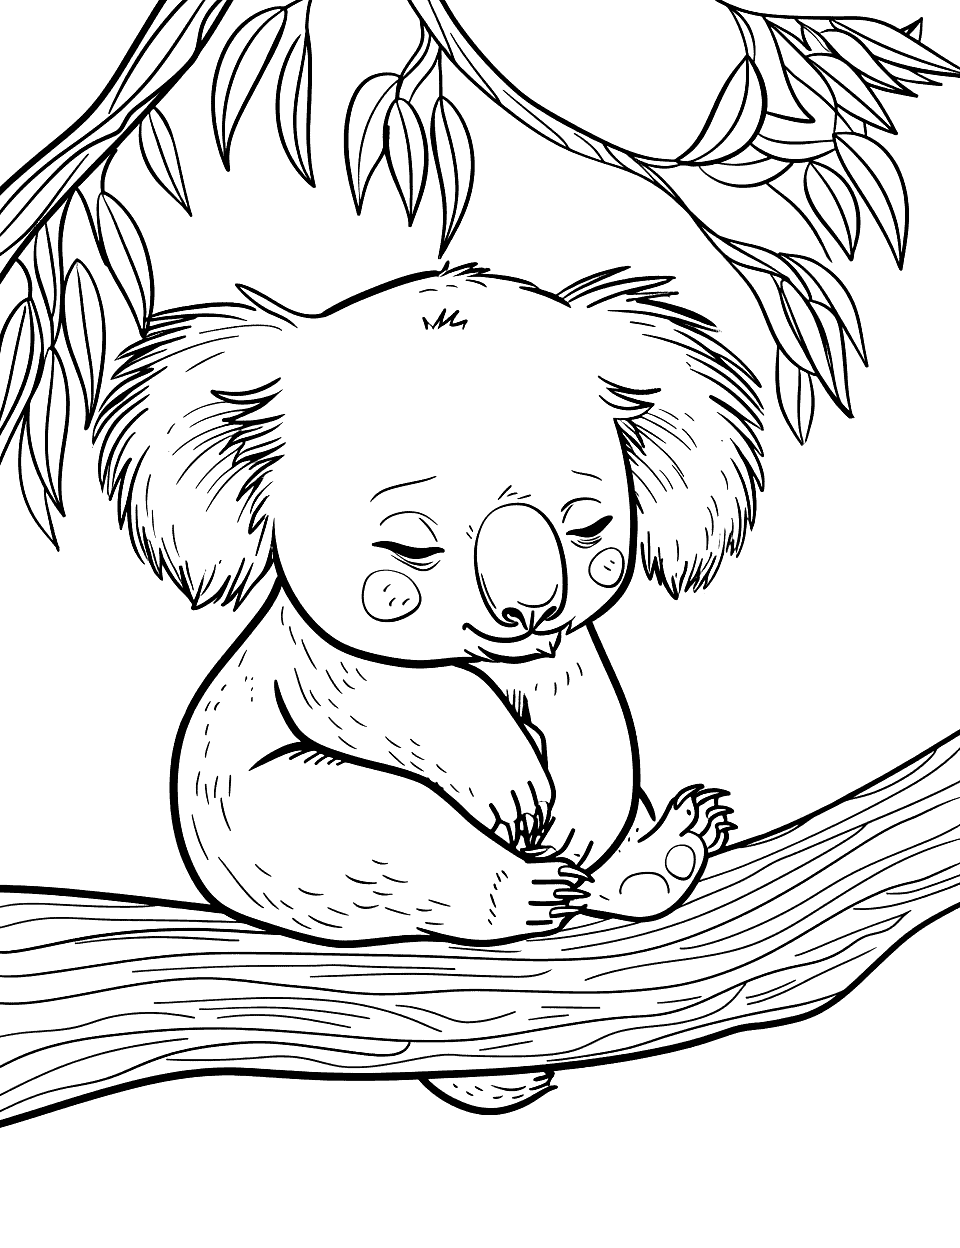 Koala in Thought Coloring Page - A koala sitting with a contemplative expression, surrounded by a calm, natural setting.